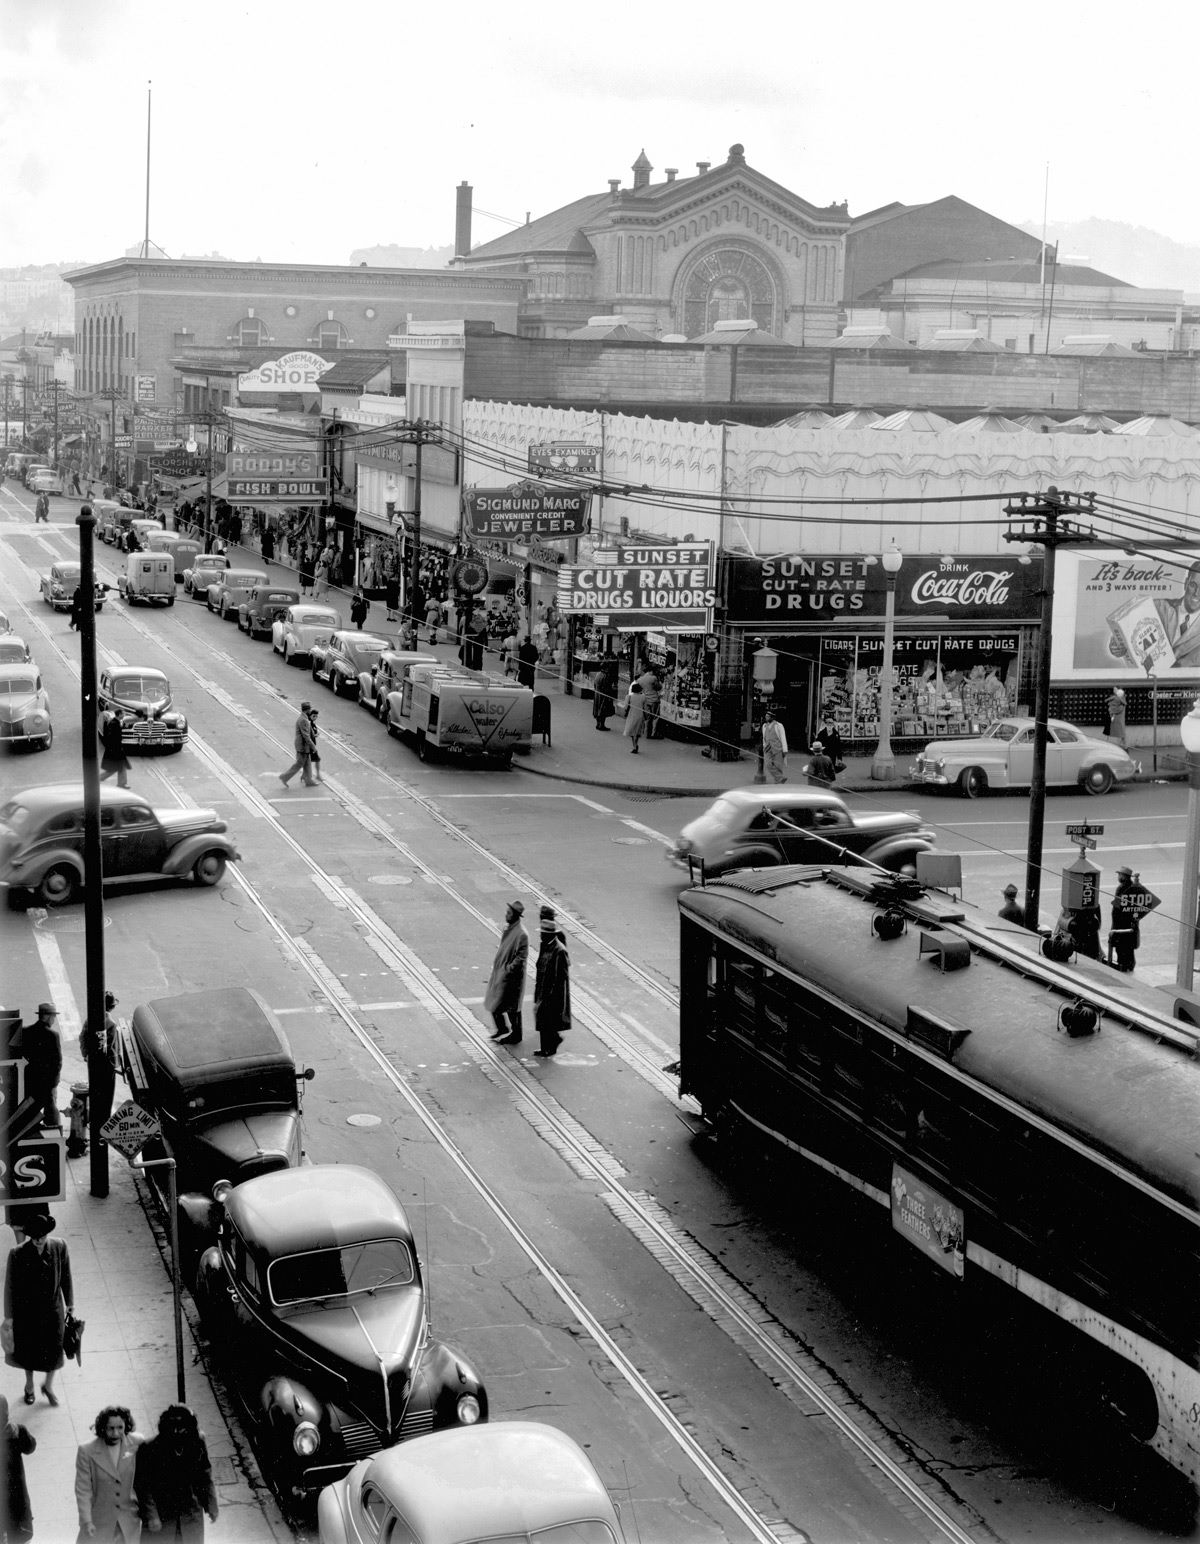 Geary and Post, 1946